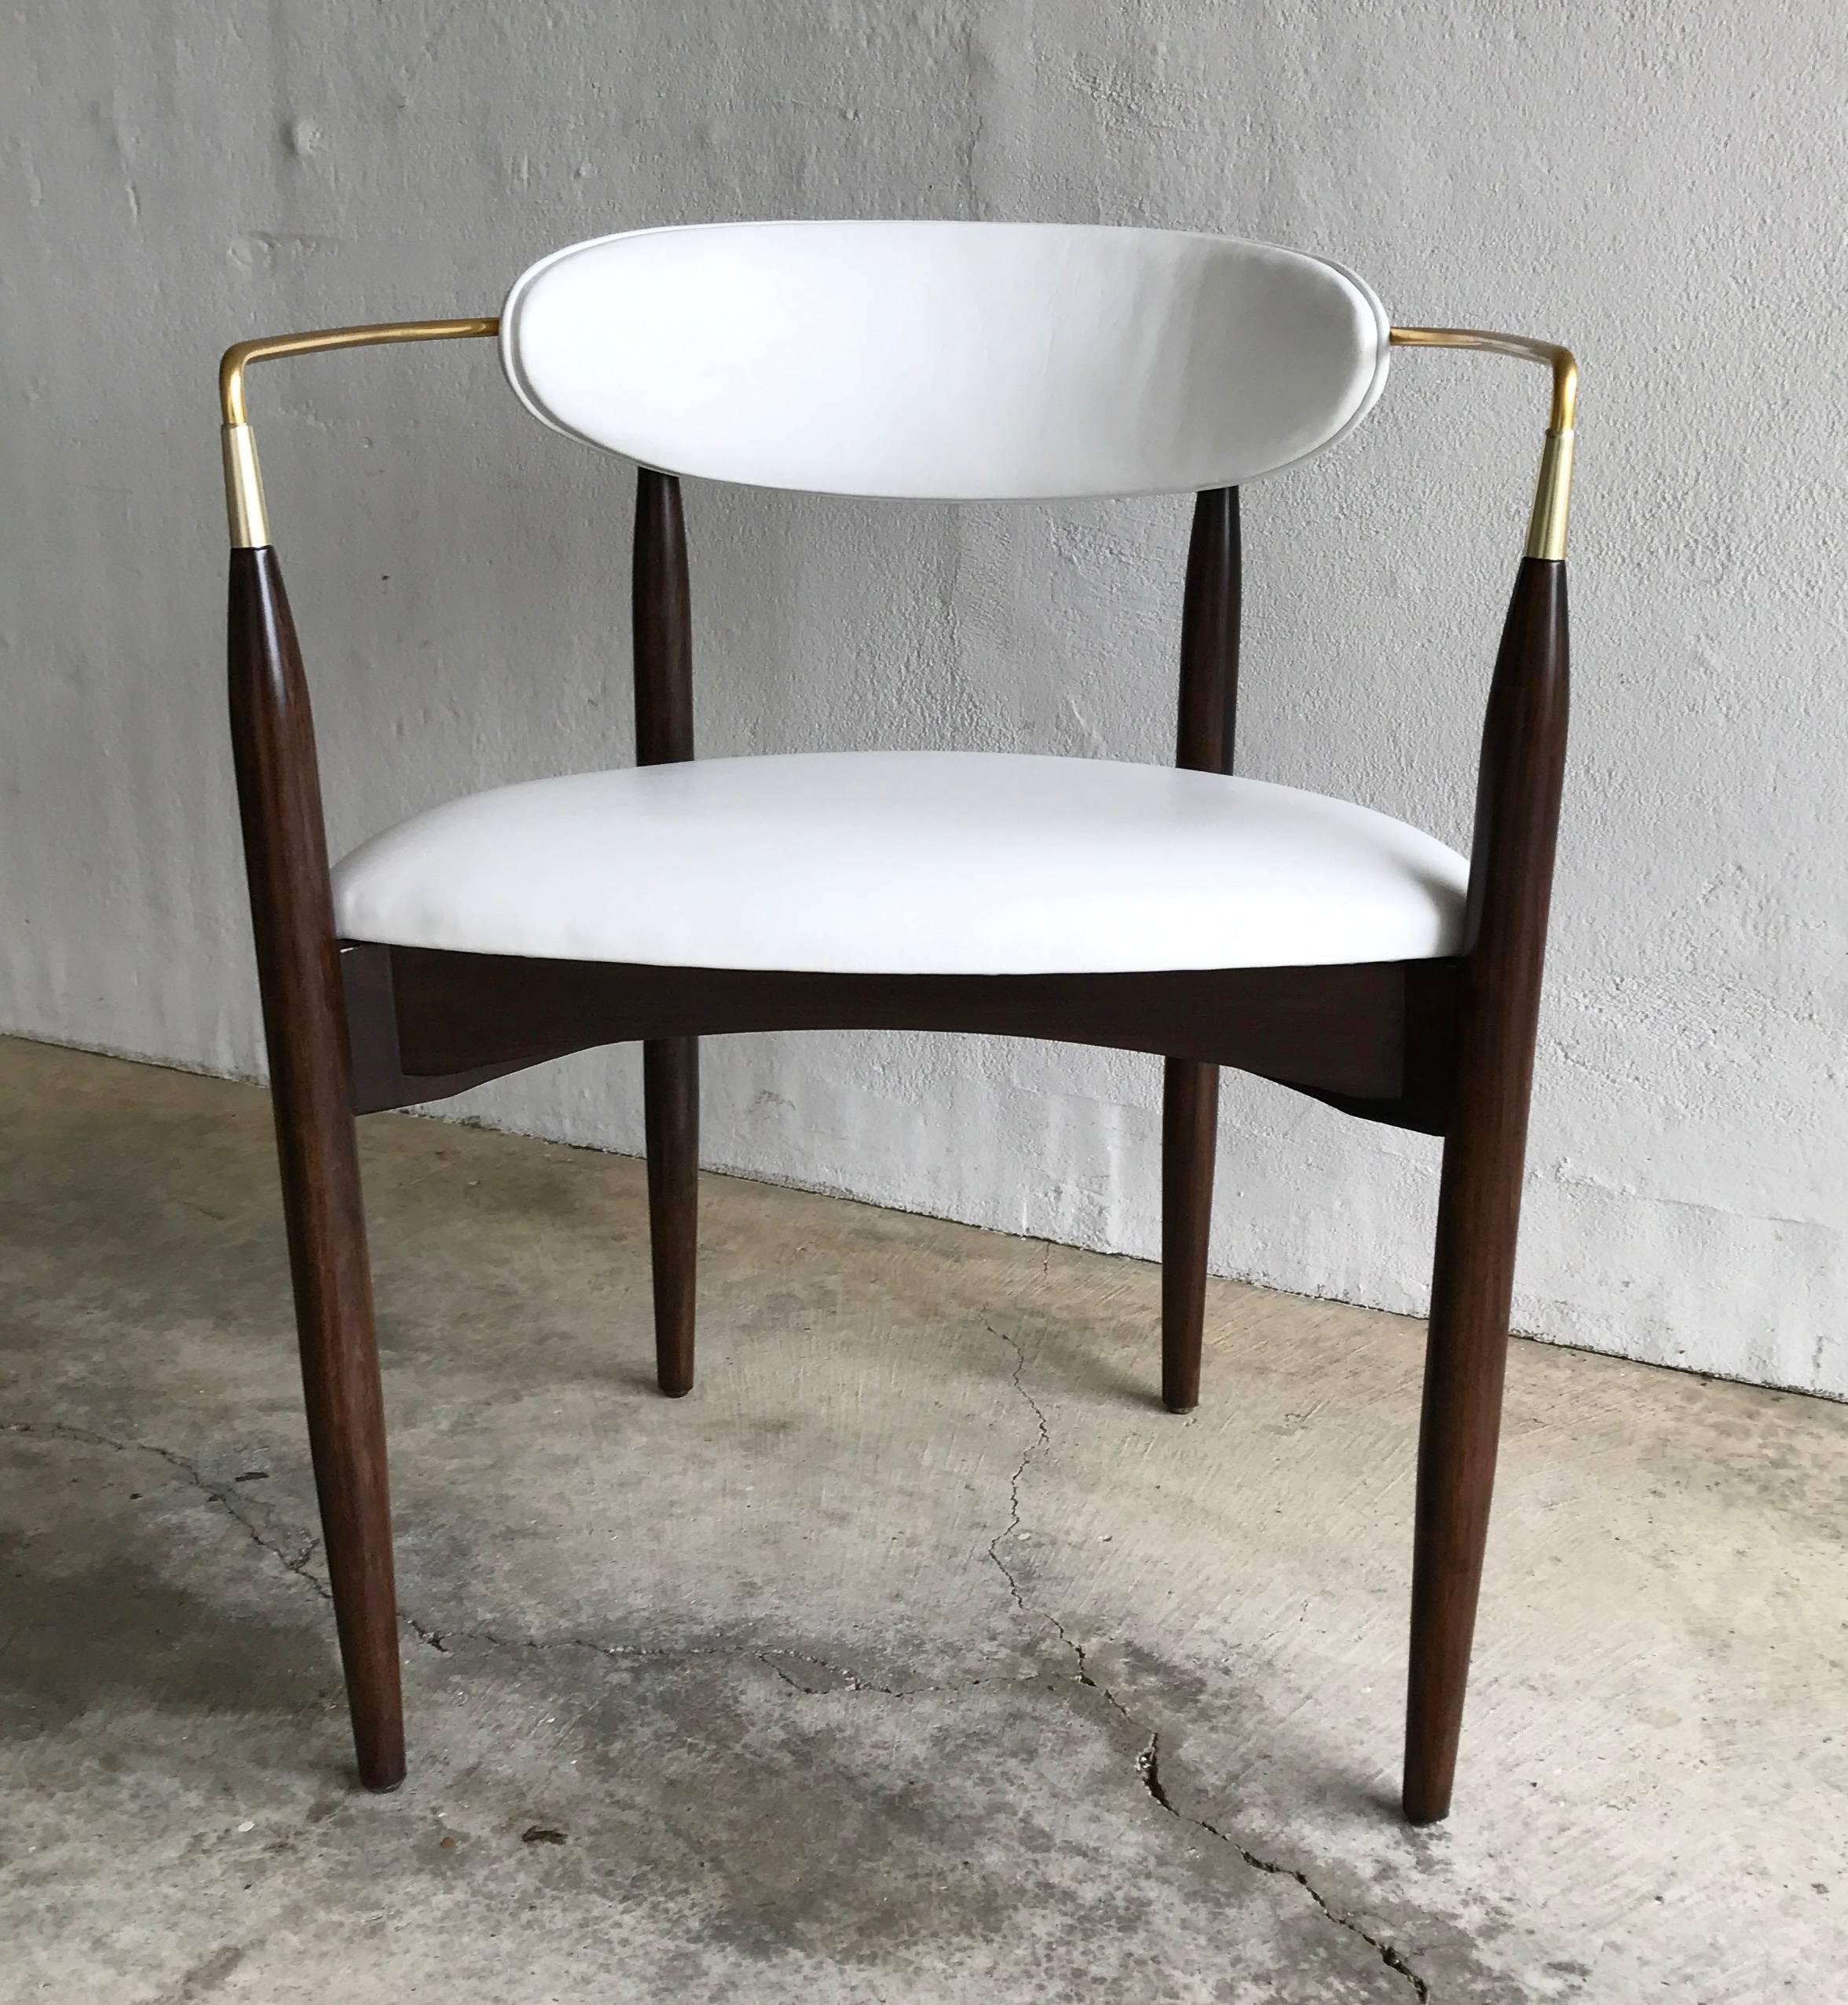 Selig armchair newly upholstered in a soft off-white leather and the wooden refinished in a rich dark brown. The arm is a circular brass band starting from the front arms / legs and wrapping around the seat back.